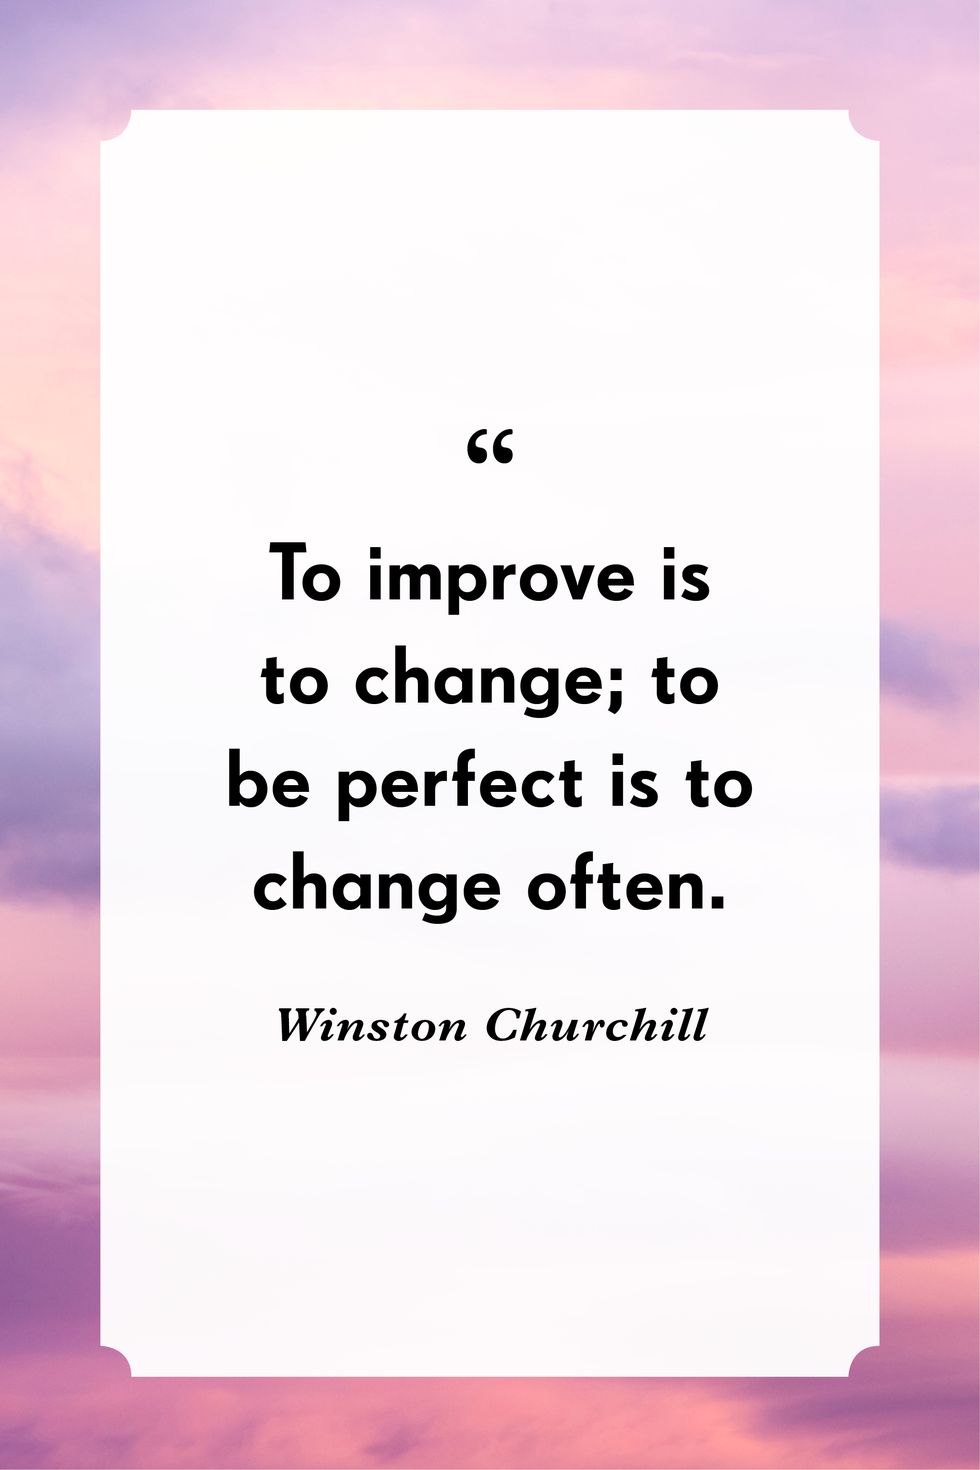 41 Best Quotes About Change - Inspiring Sayings to Navigate Life Changes